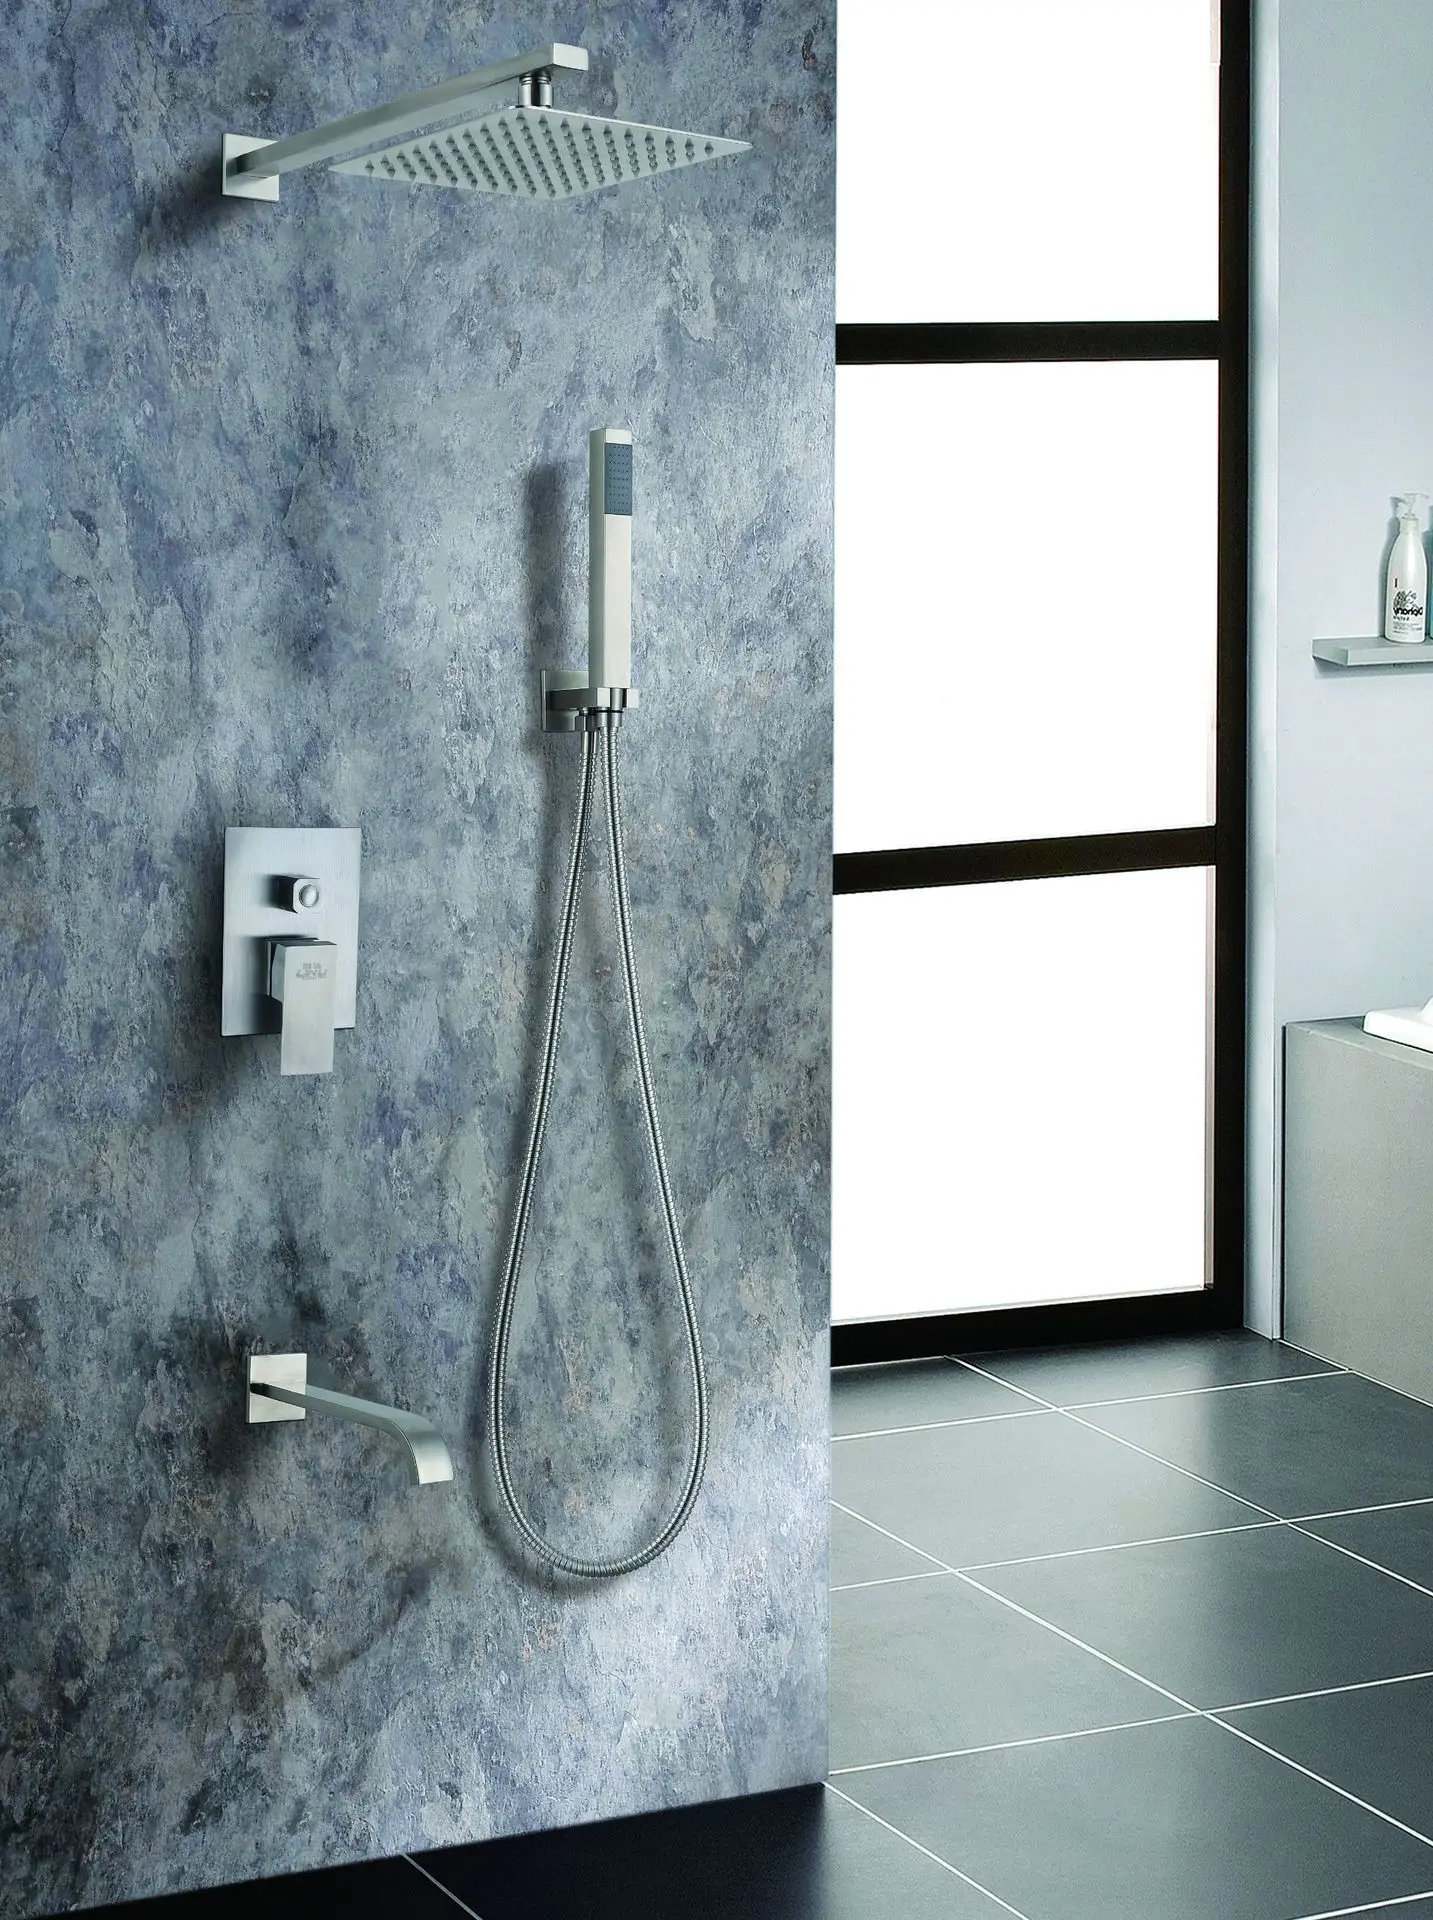 Stainless steel concealed wall-mounted hotel shower set